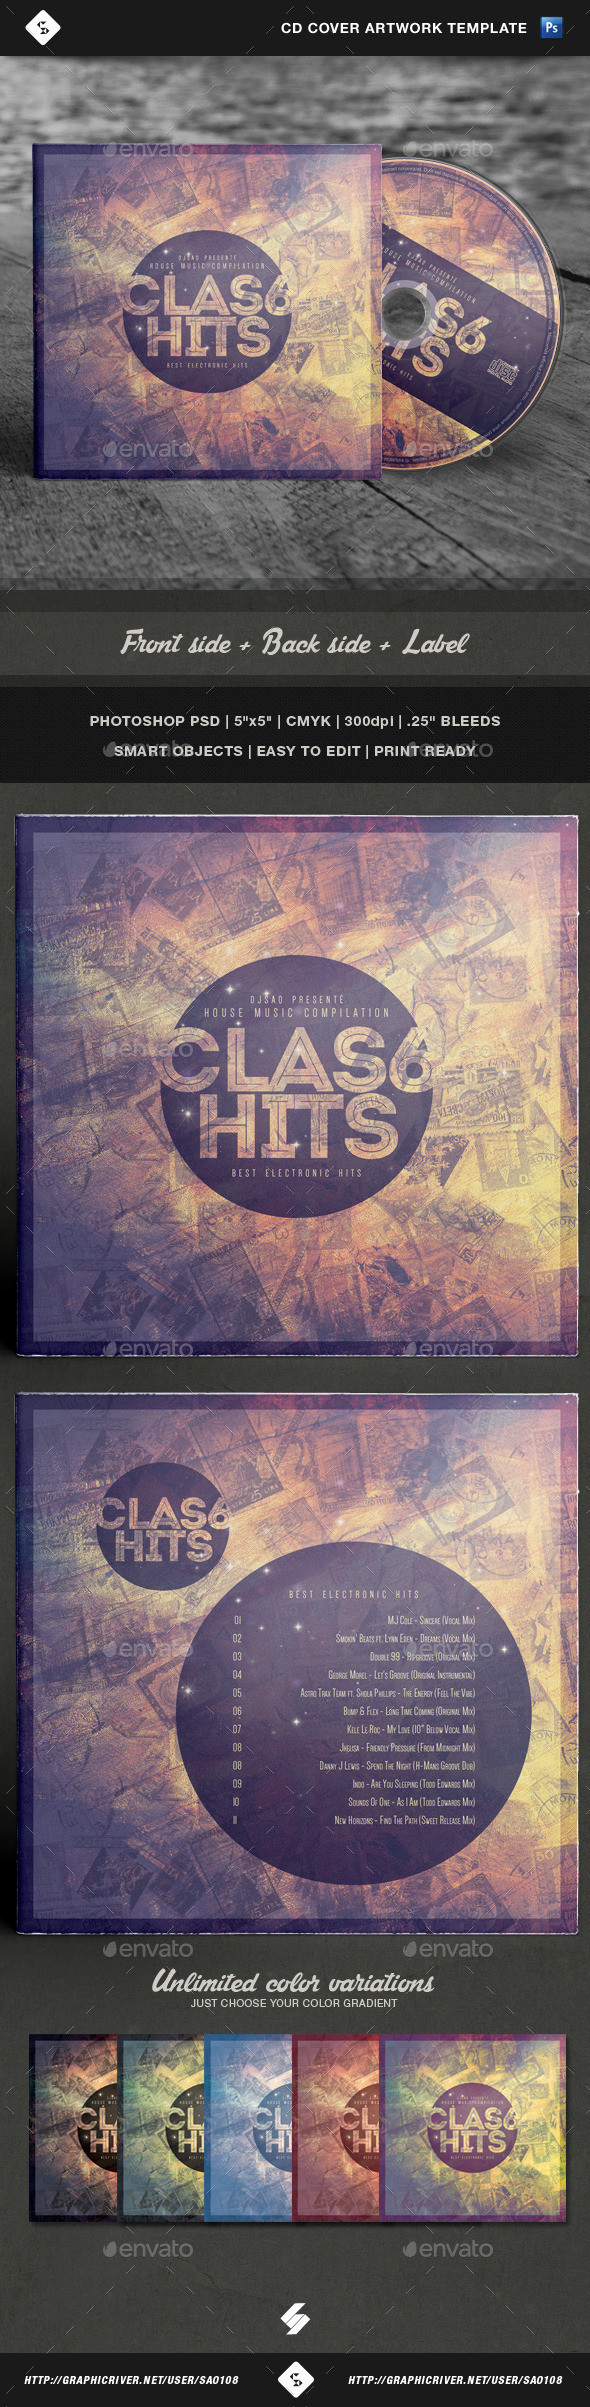 Clas6hits cd cover preview